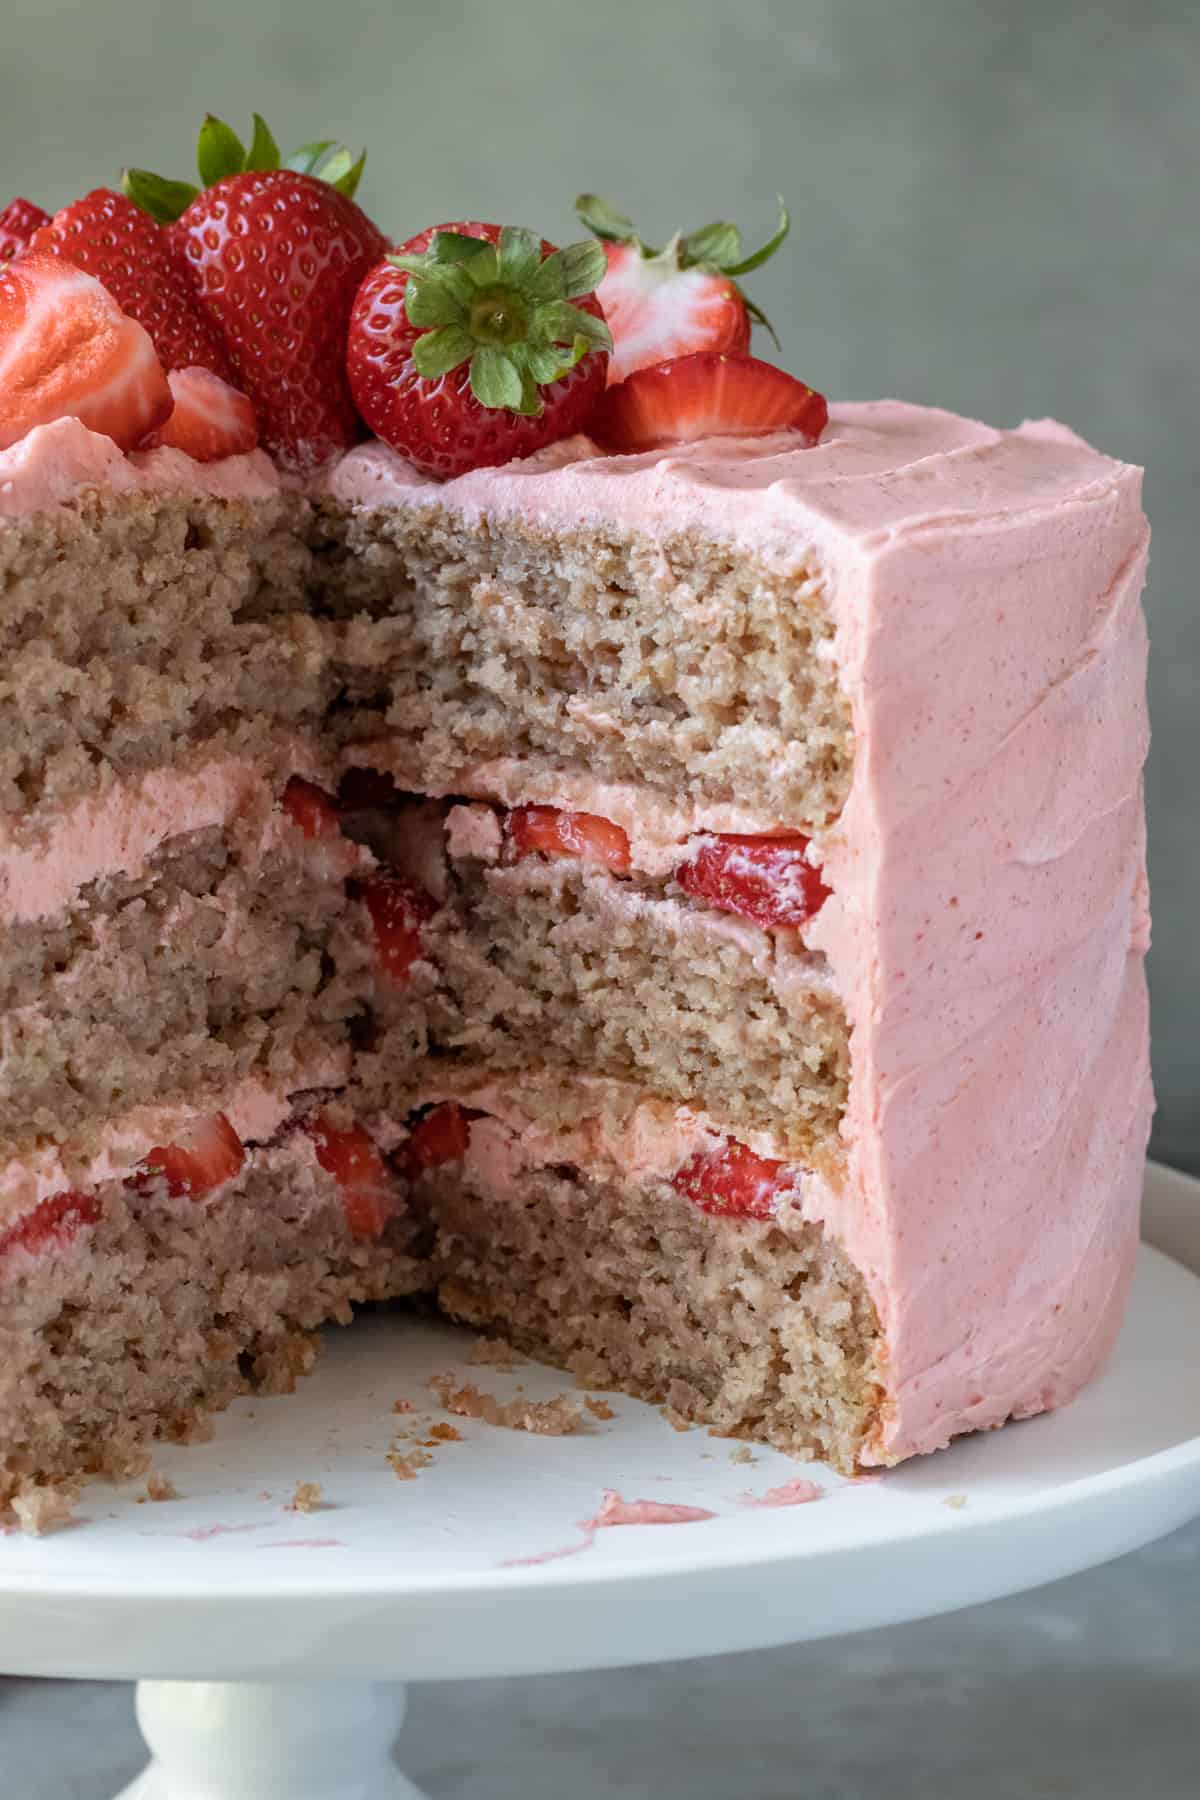 close up photo showing natural color of strawberry cake and layers of frosting.